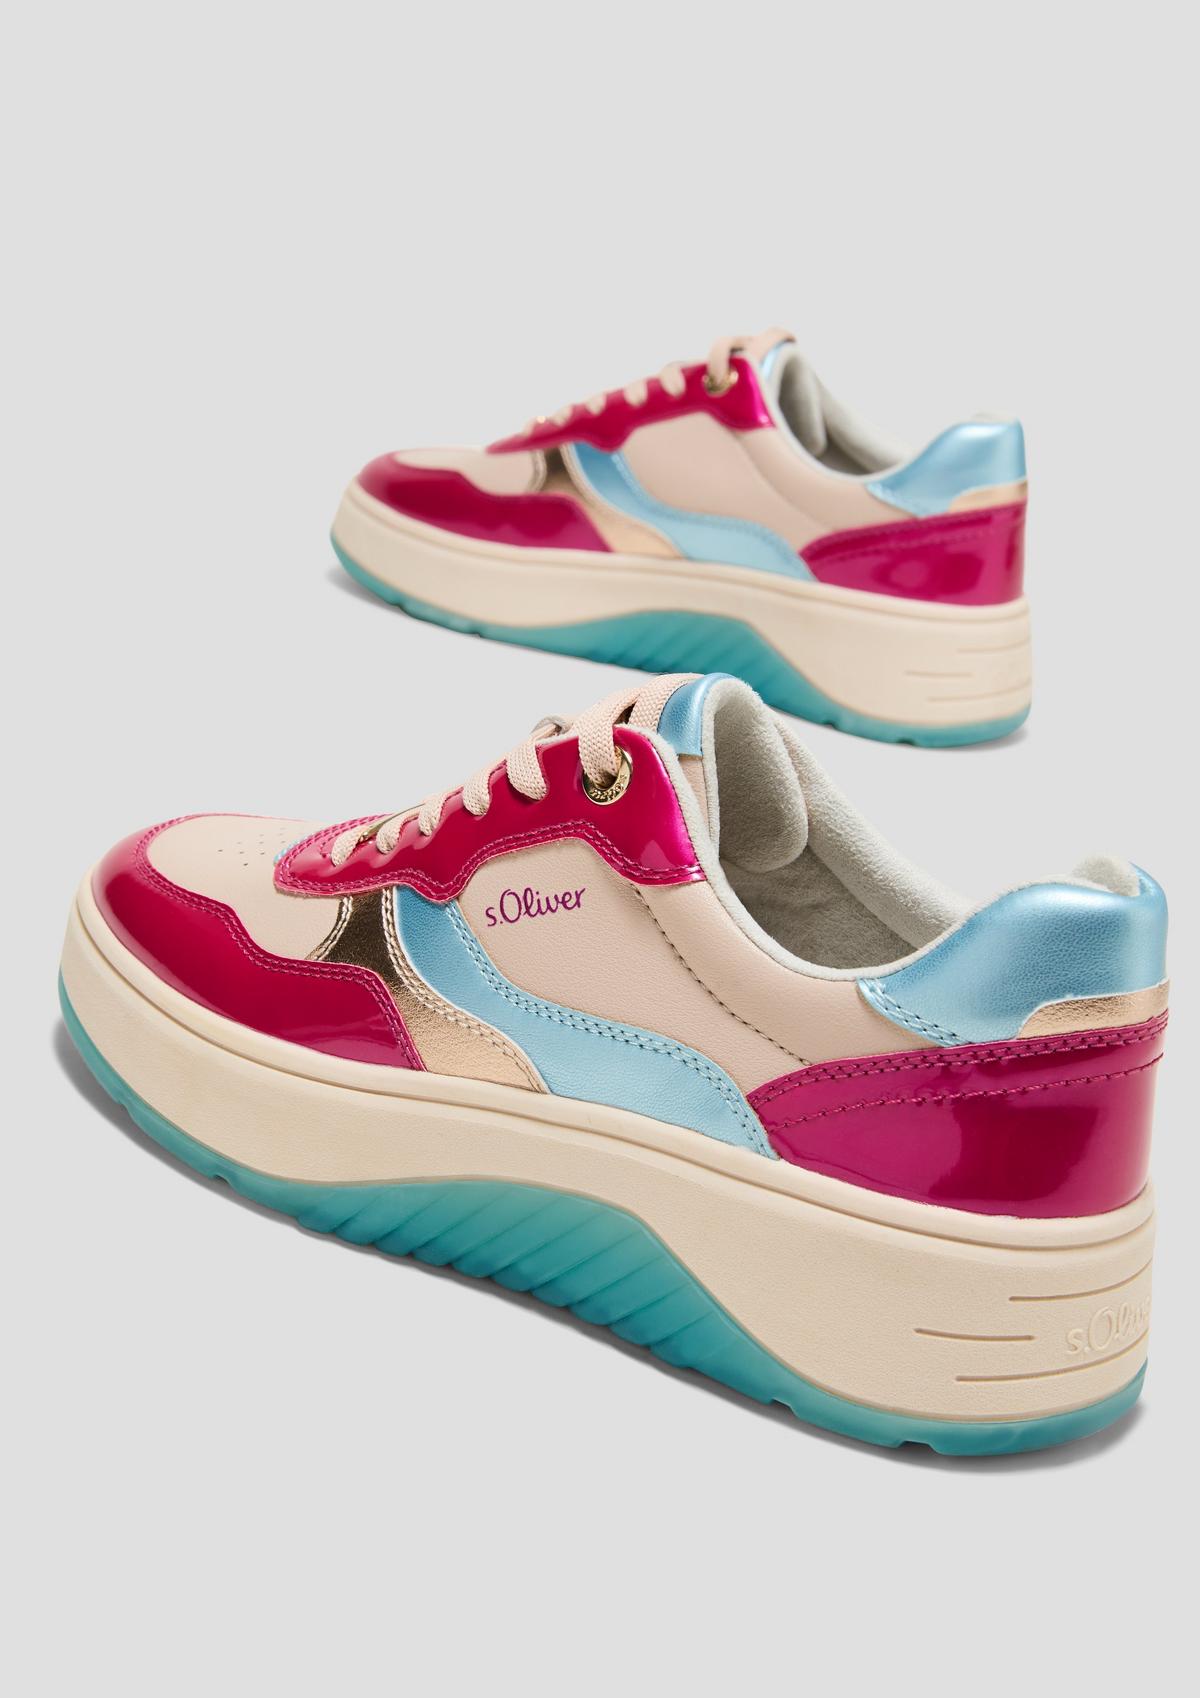 s.Oliver Sneakers au look colour blocking tendance